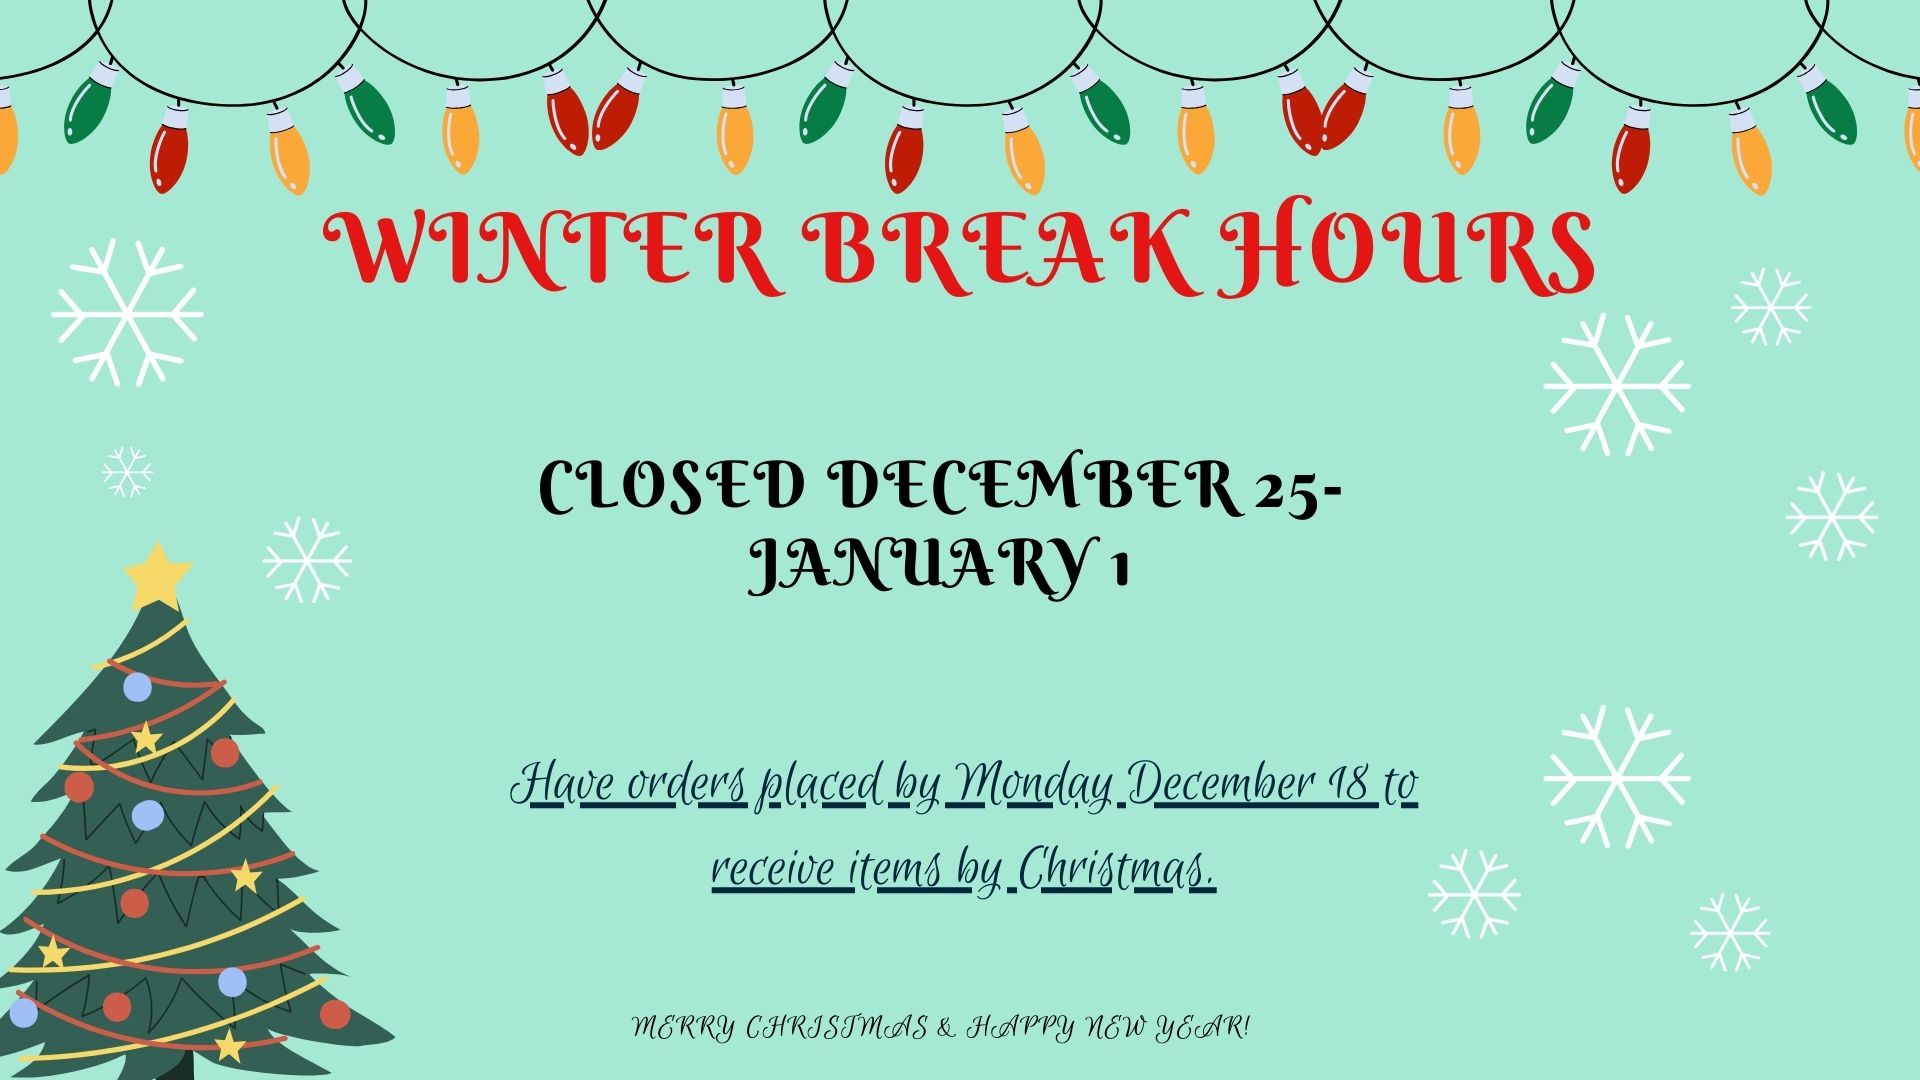 Winter break hours. Have orders placed by Monday December 18th to receive items by Christmas.